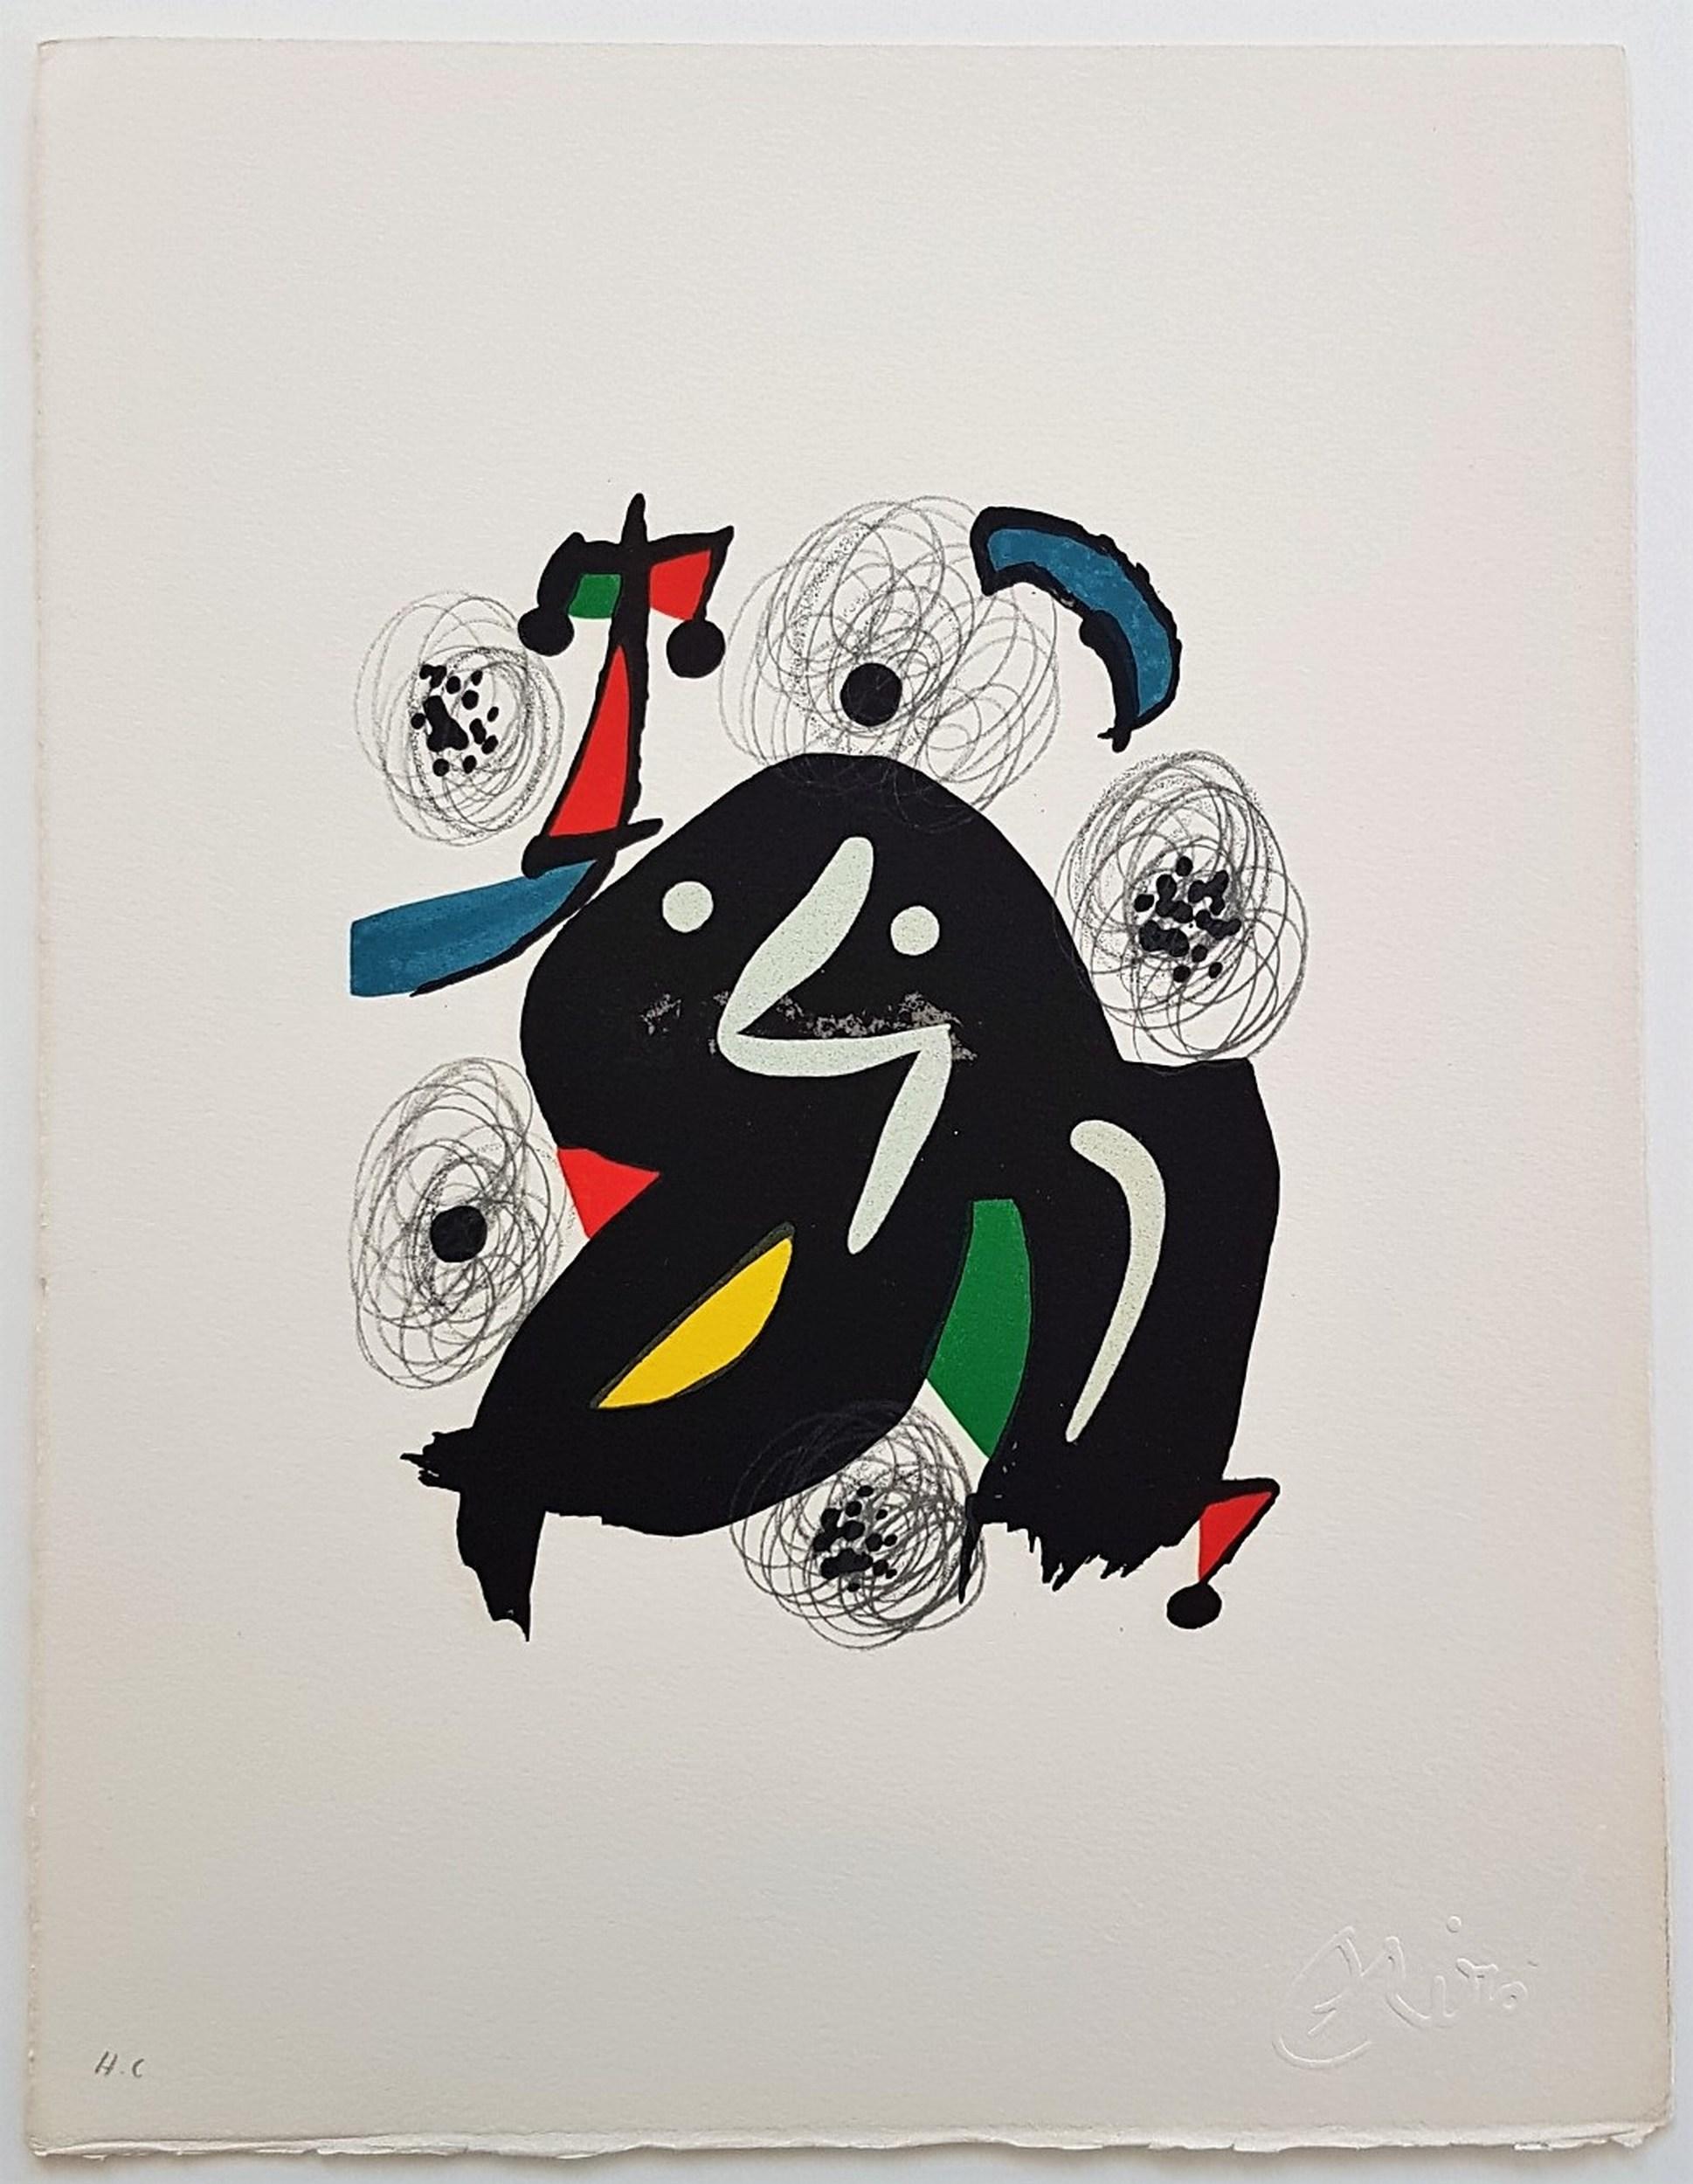 La Mélodie Acide - 4 (50% OFF LIST PRICE & $10 OFF SHIPPING - LIMITED TIME ONLY) - Print by Joan Miró